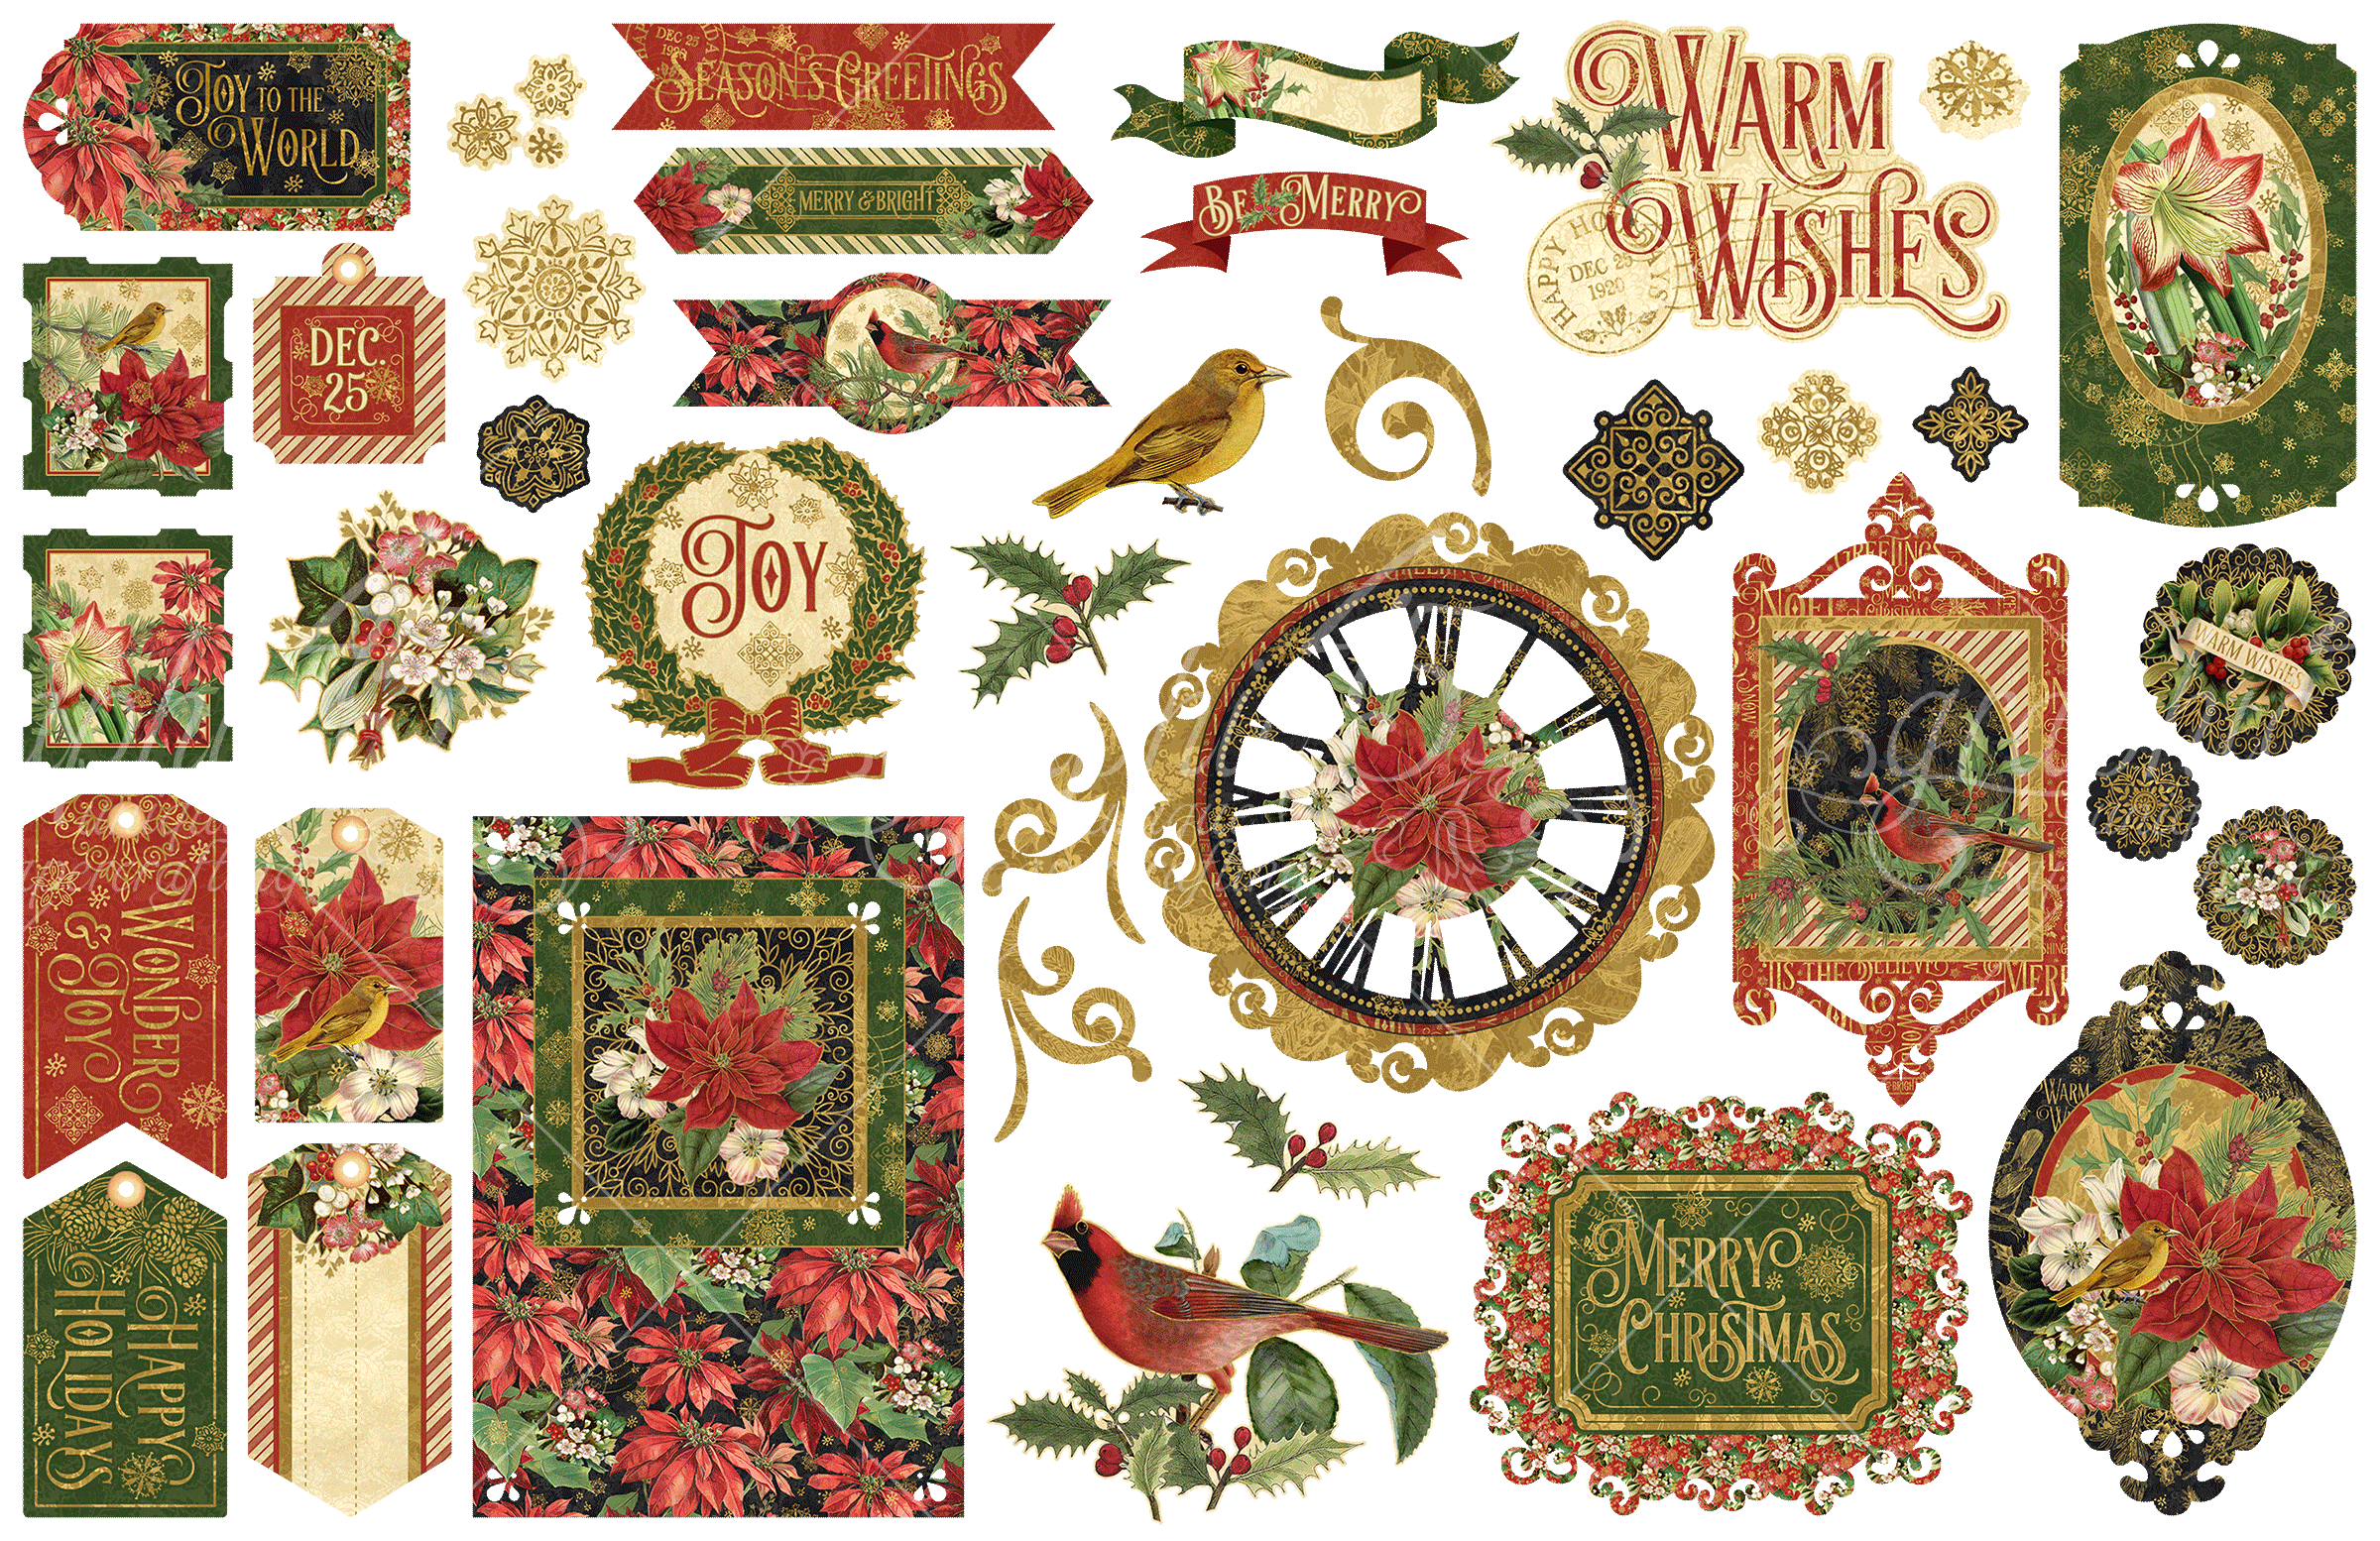 Warm Wishes Collection Ephemera Double-Sided Die Cut Assortment by Graphic 45 - Scrapbook Supply Companies